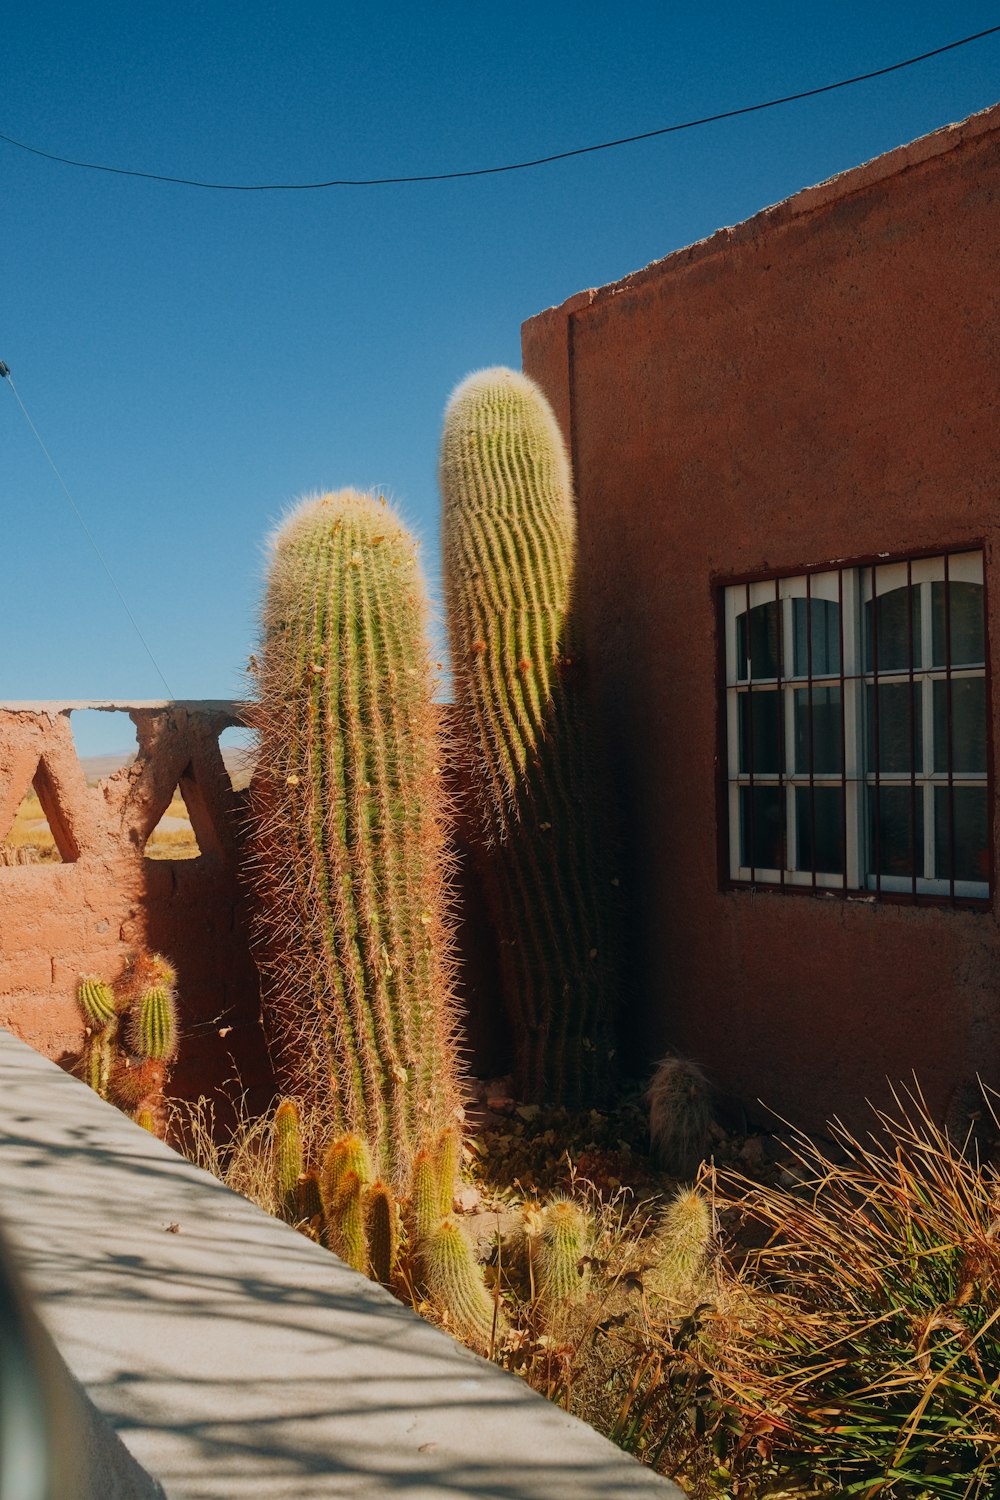 a cactus in front of a building